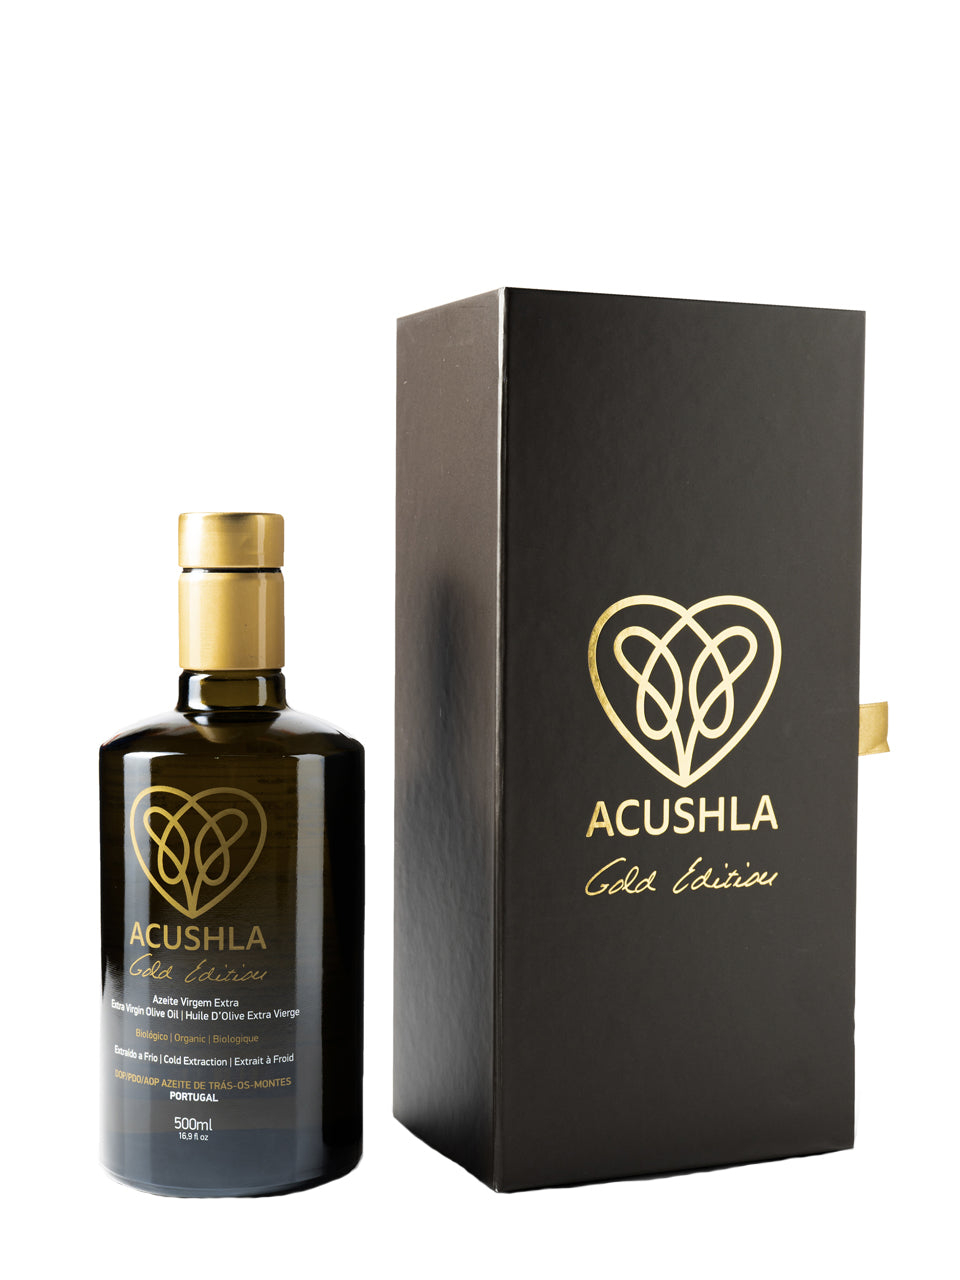 Acushla Gold Edition Organic DOP Trás-os-Montes w/ Gift Box 6-Pack